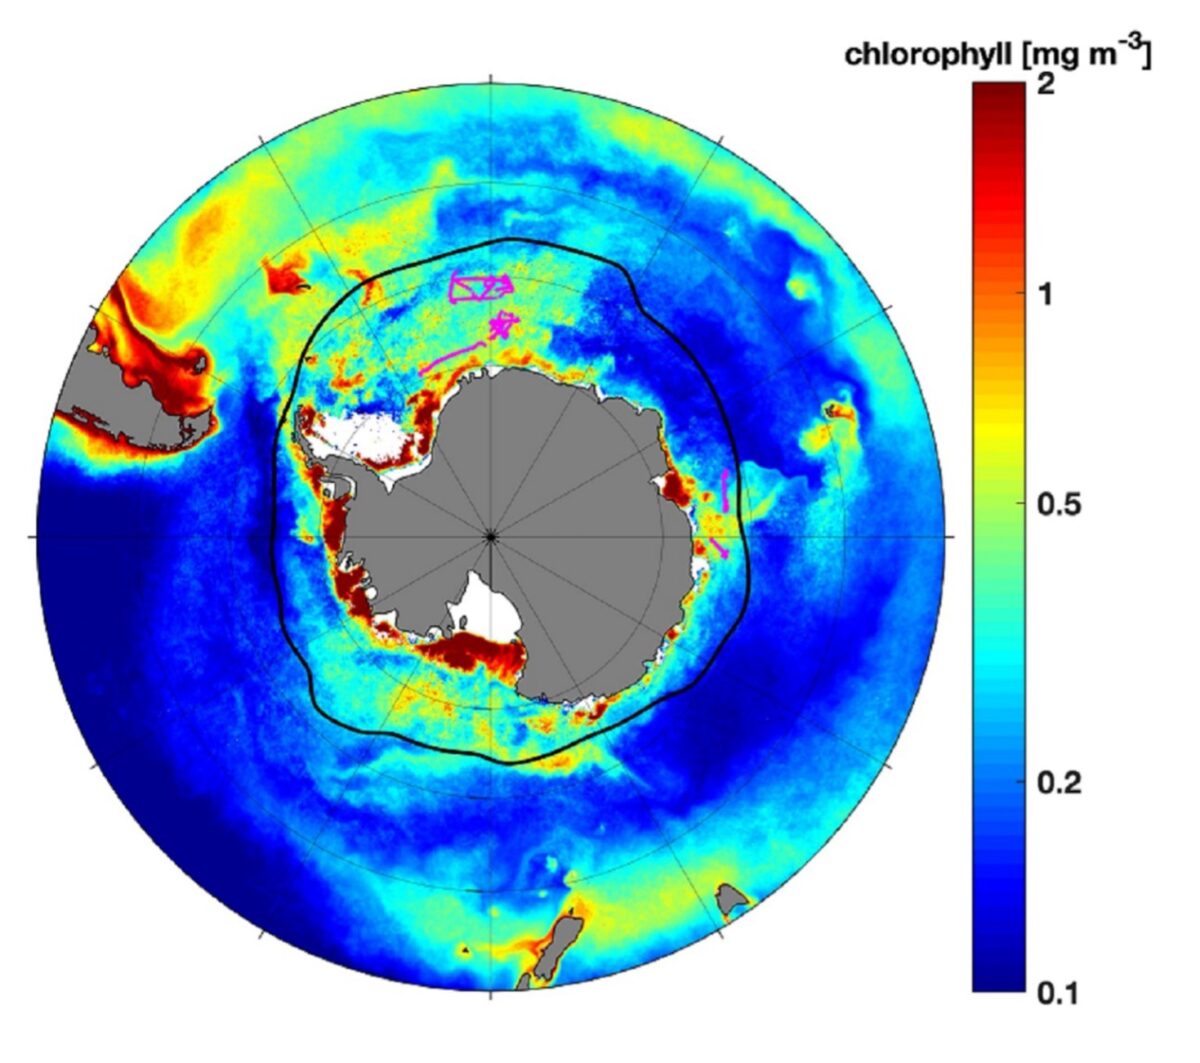  Chlorophyll concentration around Antarctica, from blue to red. Ryan focus on low chlorophyll regions (in blue).